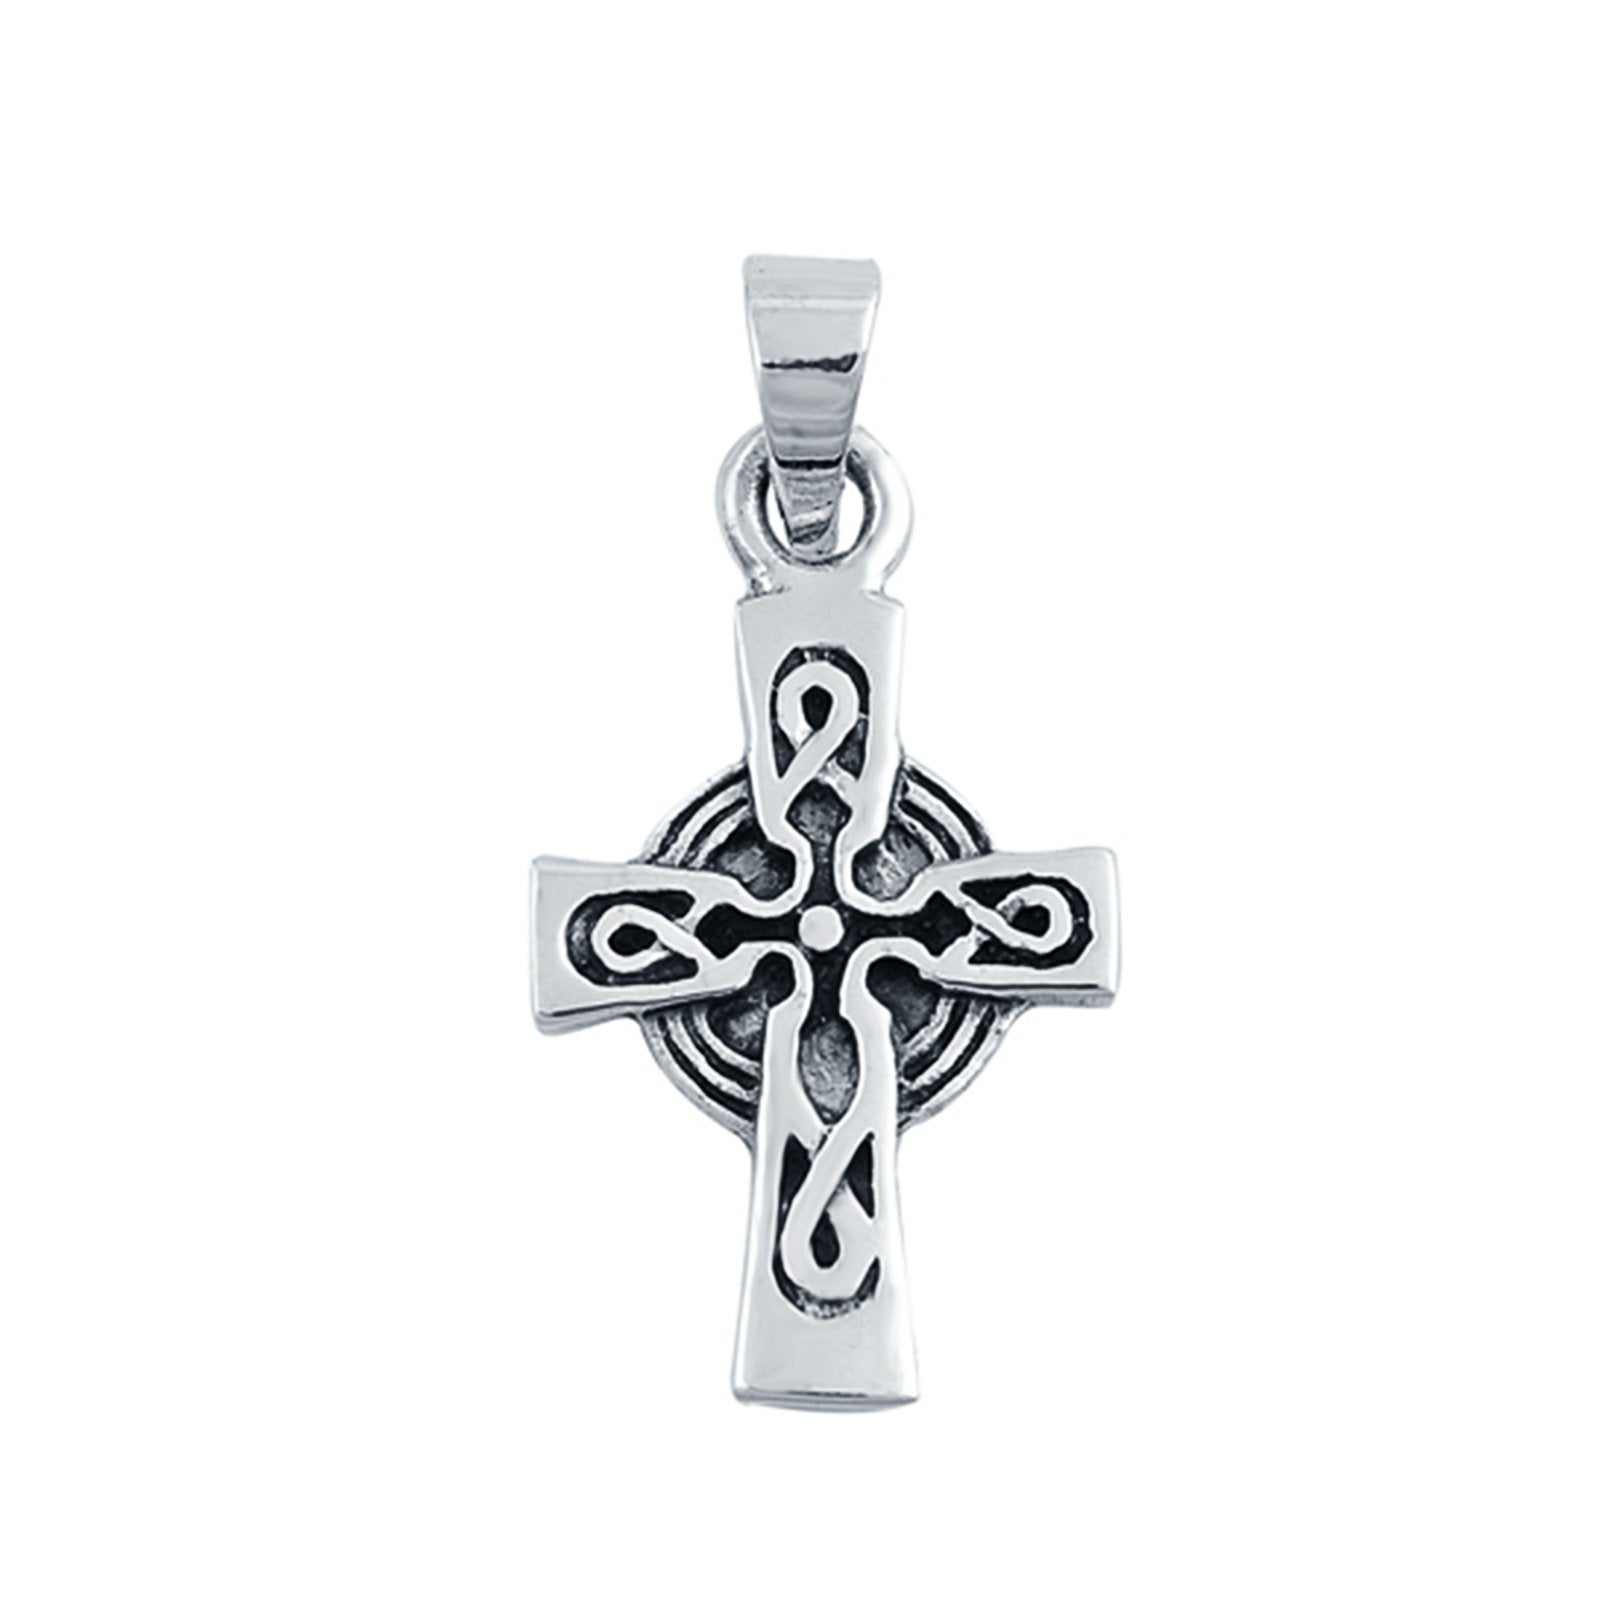 Cross Pendant Charm Round 925 Sterling Silver